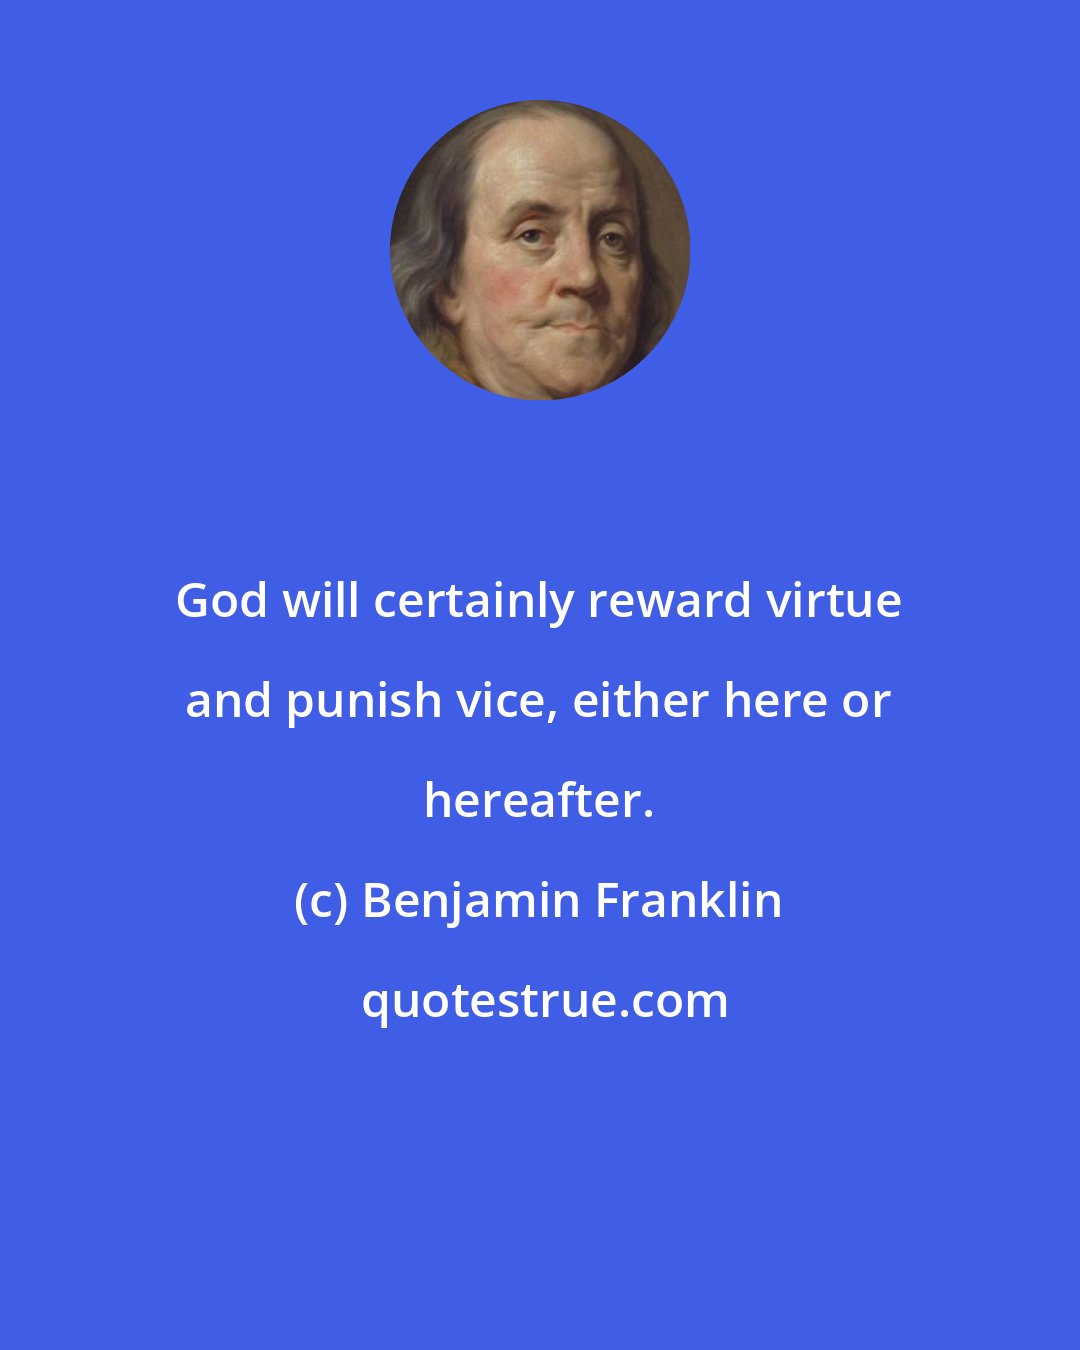 Benjamin Franklin: God will certainly reward virtue and punish vice, either here or hereafter.